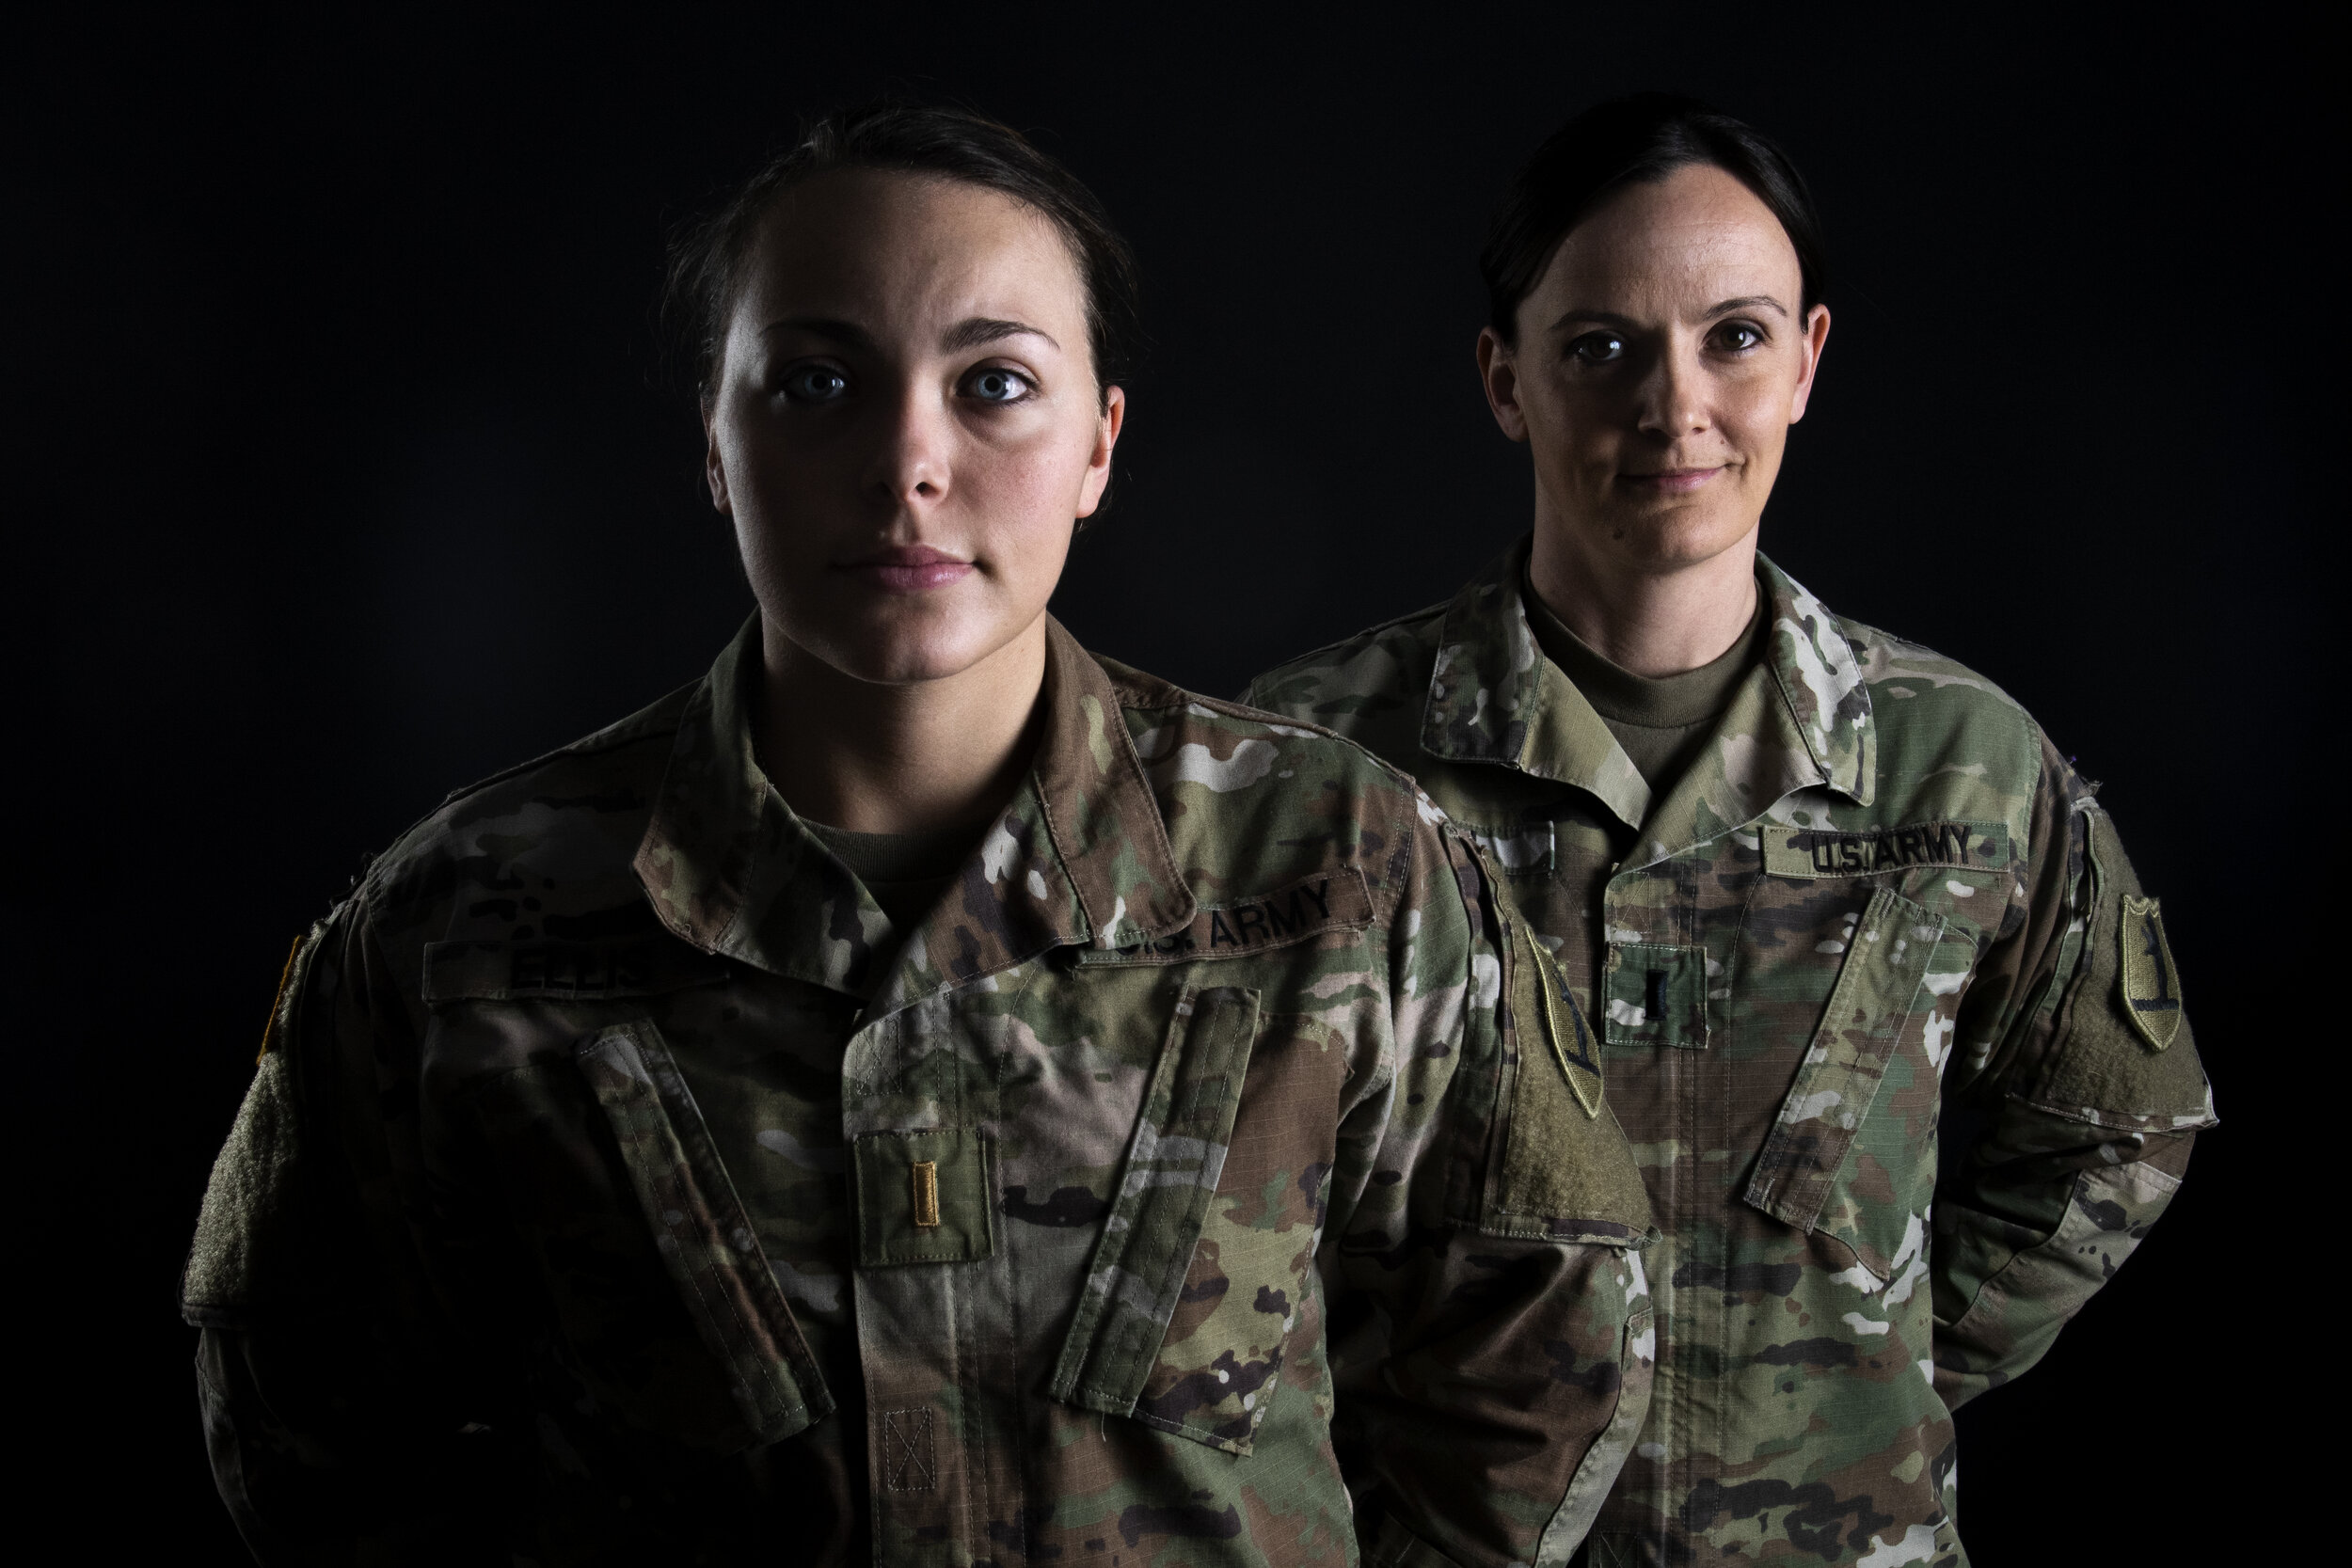  Crystal Cecil, a first lieutenant in the Missouri Army National Guard and the officer in charge of Southeast Missouri State University’s Show-Me Gold program, poses for a portrait with her daughter Brittany Ellis (in front), a second lieutenant in t